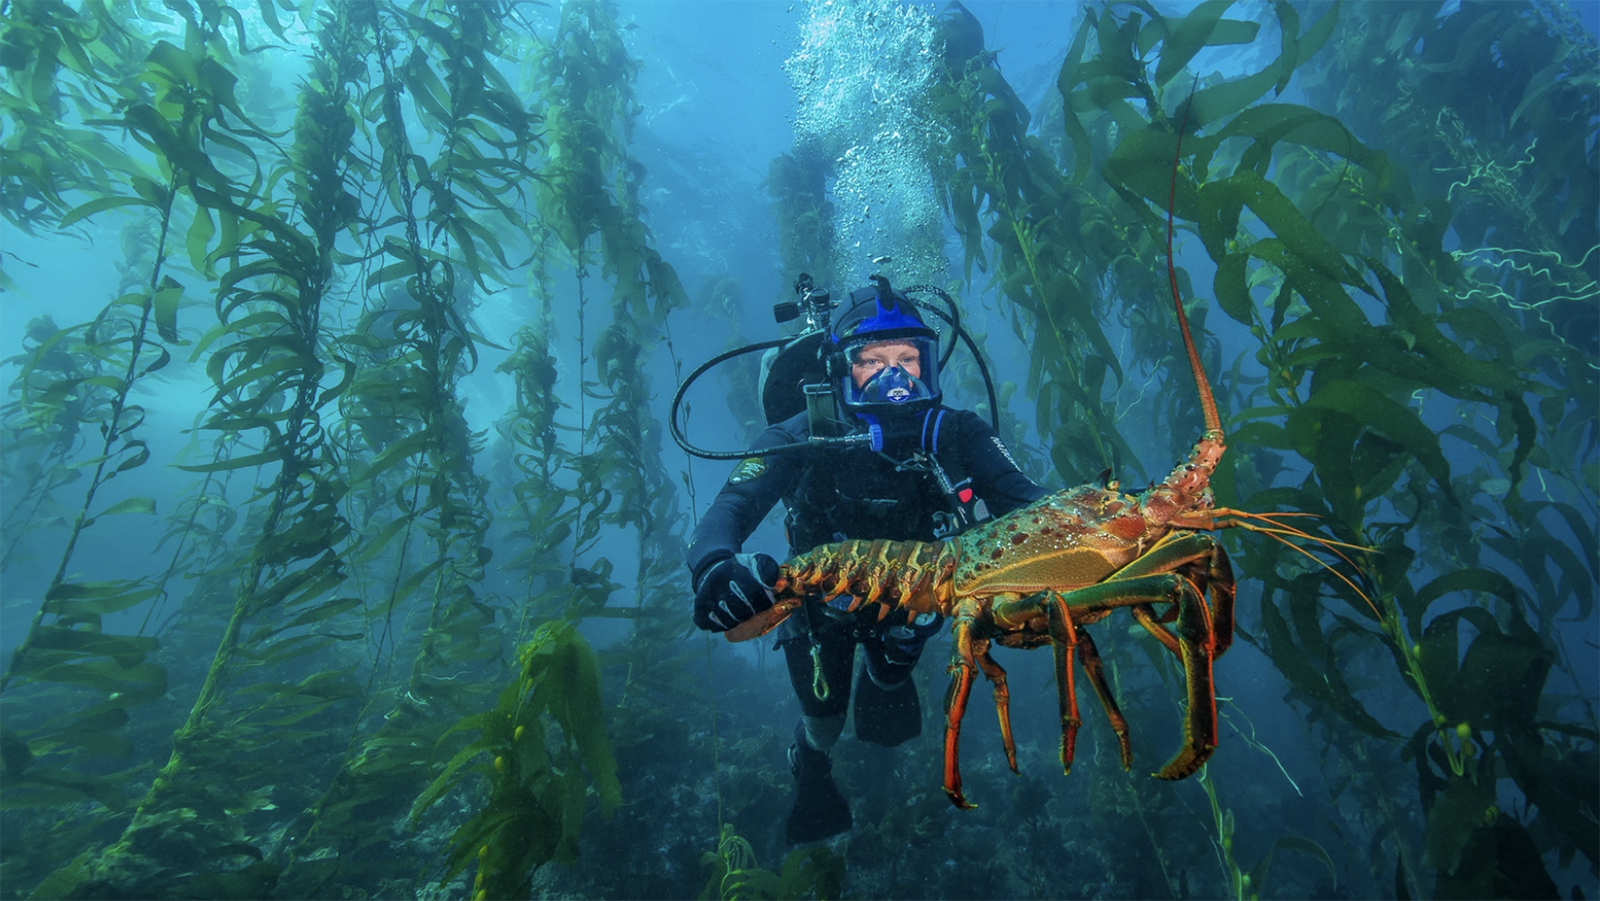 Diver holds a large California Spiny Lobster amongst kelp in Channel Islands National Park